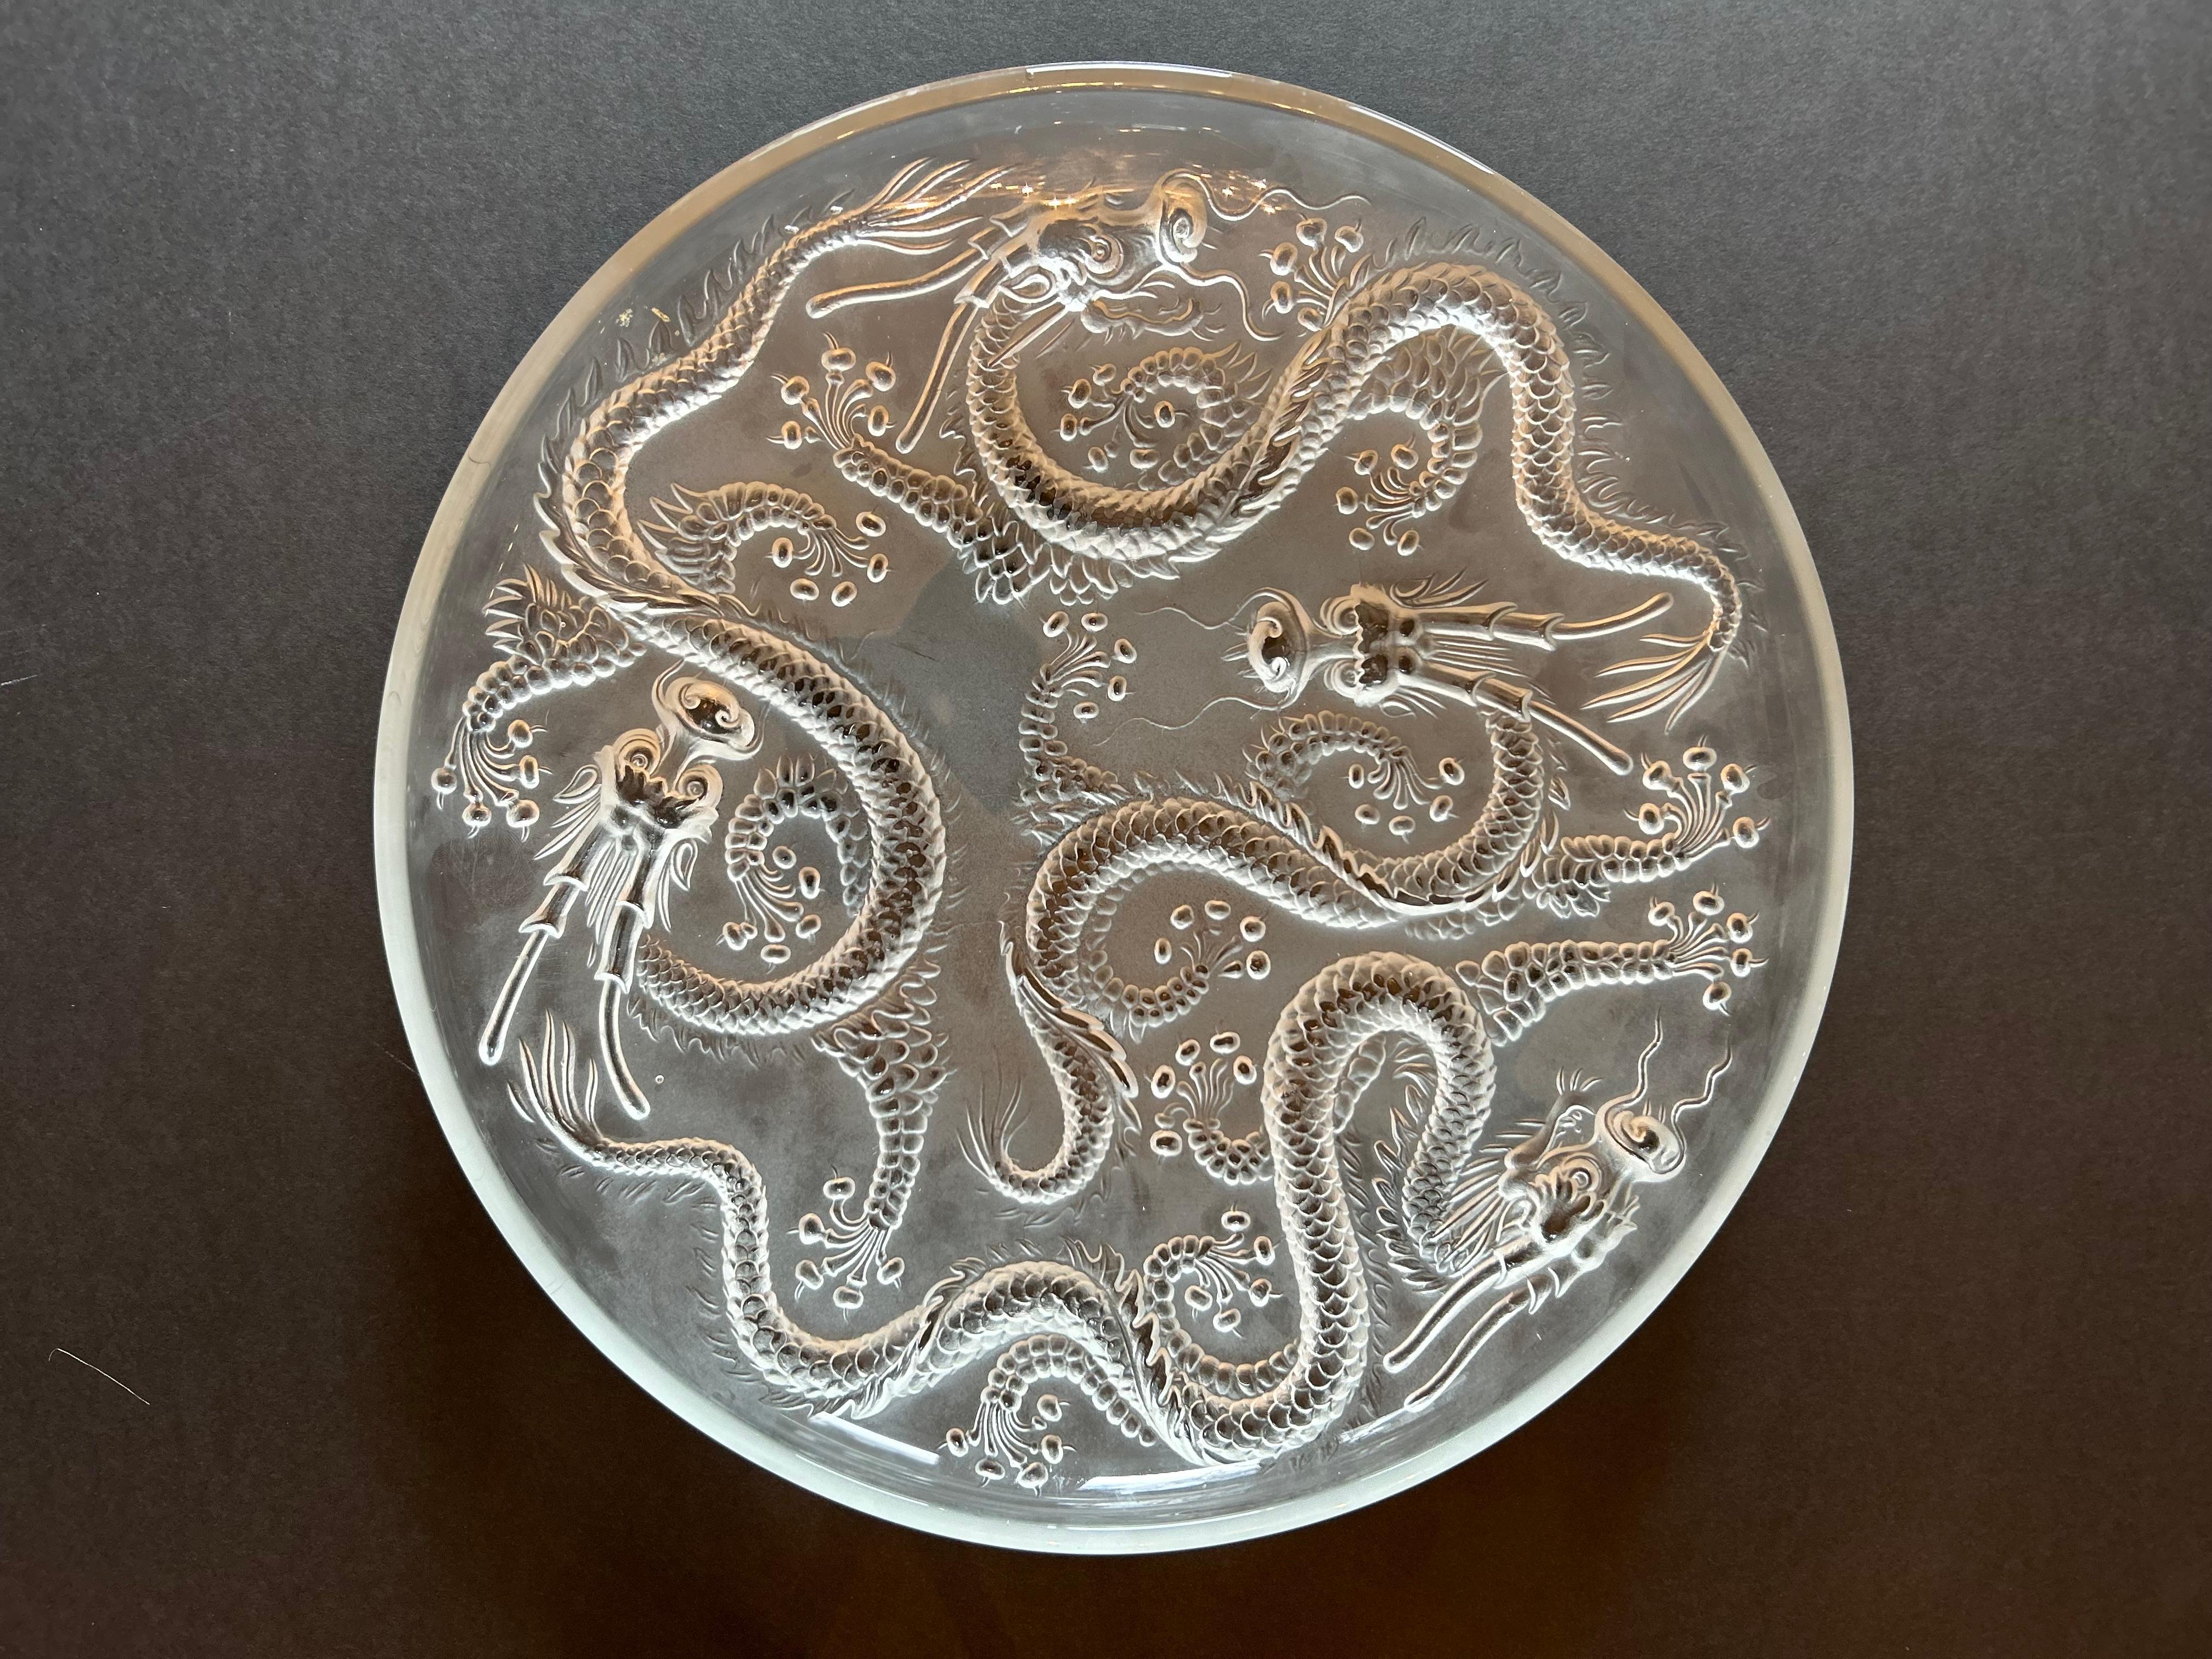 A fabulous art glass bowl from the Art Deco period, designed by Josef Inwald for Barolac. This bowl showcases sinuous curling dragons in the Chinese style in frosted
art glass with a matte finish, high relief and intricate detail. Made in